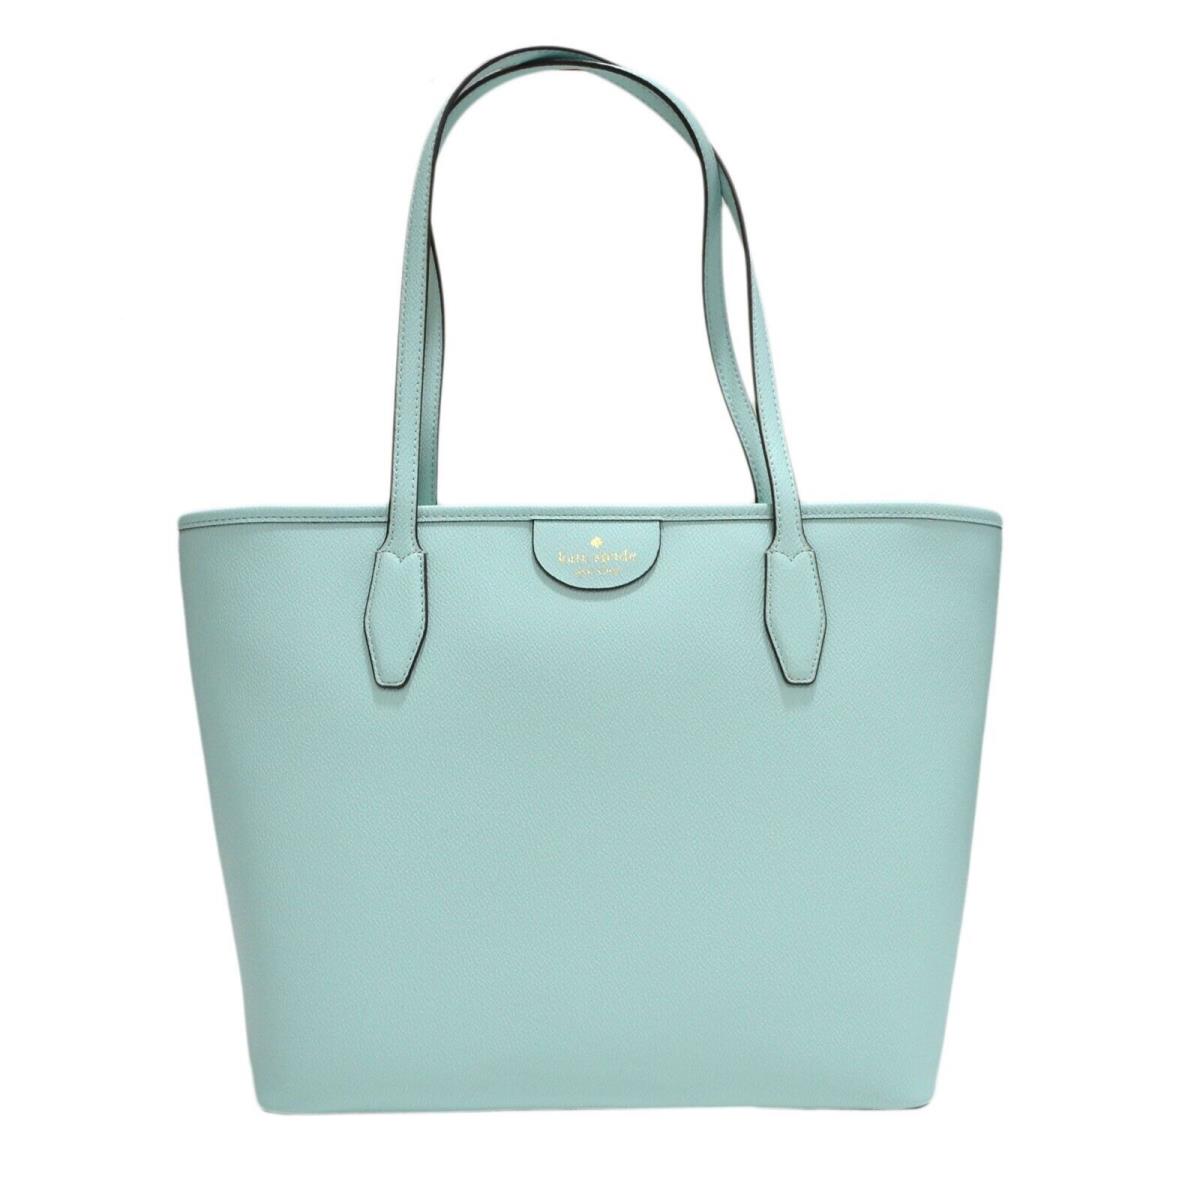 Kate Spade New York Spring Meadow Tote Bag Logo Two Handle Purse Solid Teal New - Handle/Strap: Teal, Hardware: Gold, Exterior: Teal